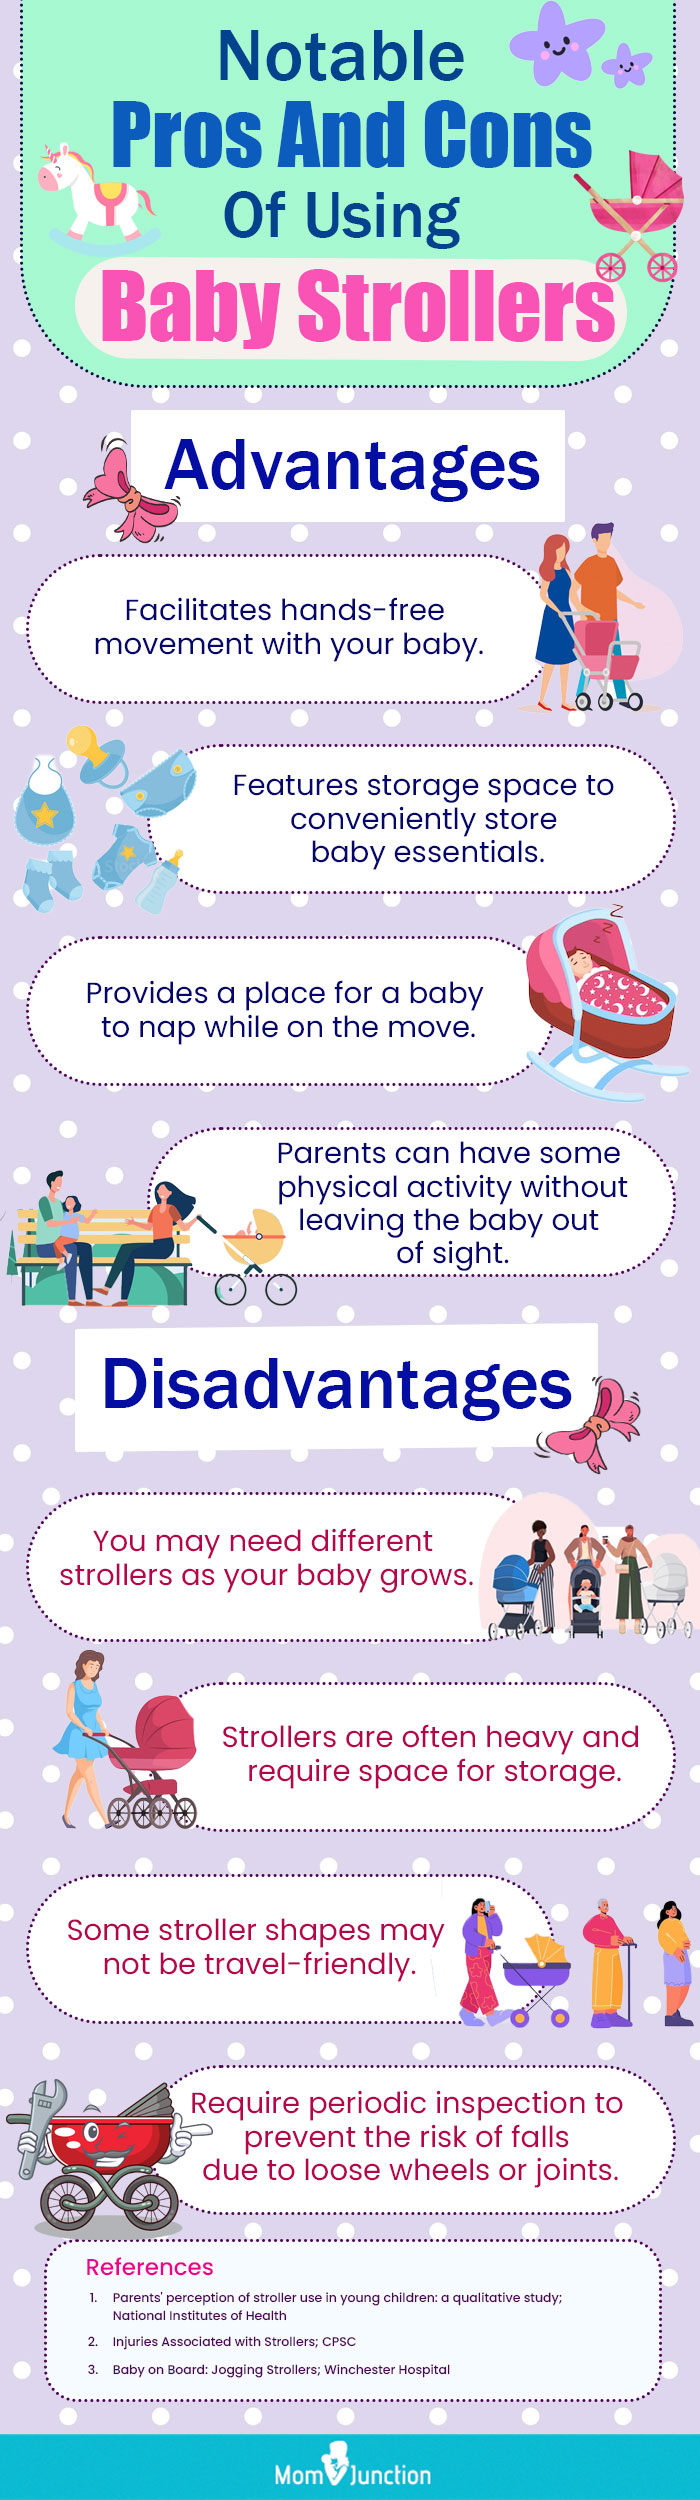 notable pros and cons of using baby strollers (infographic)